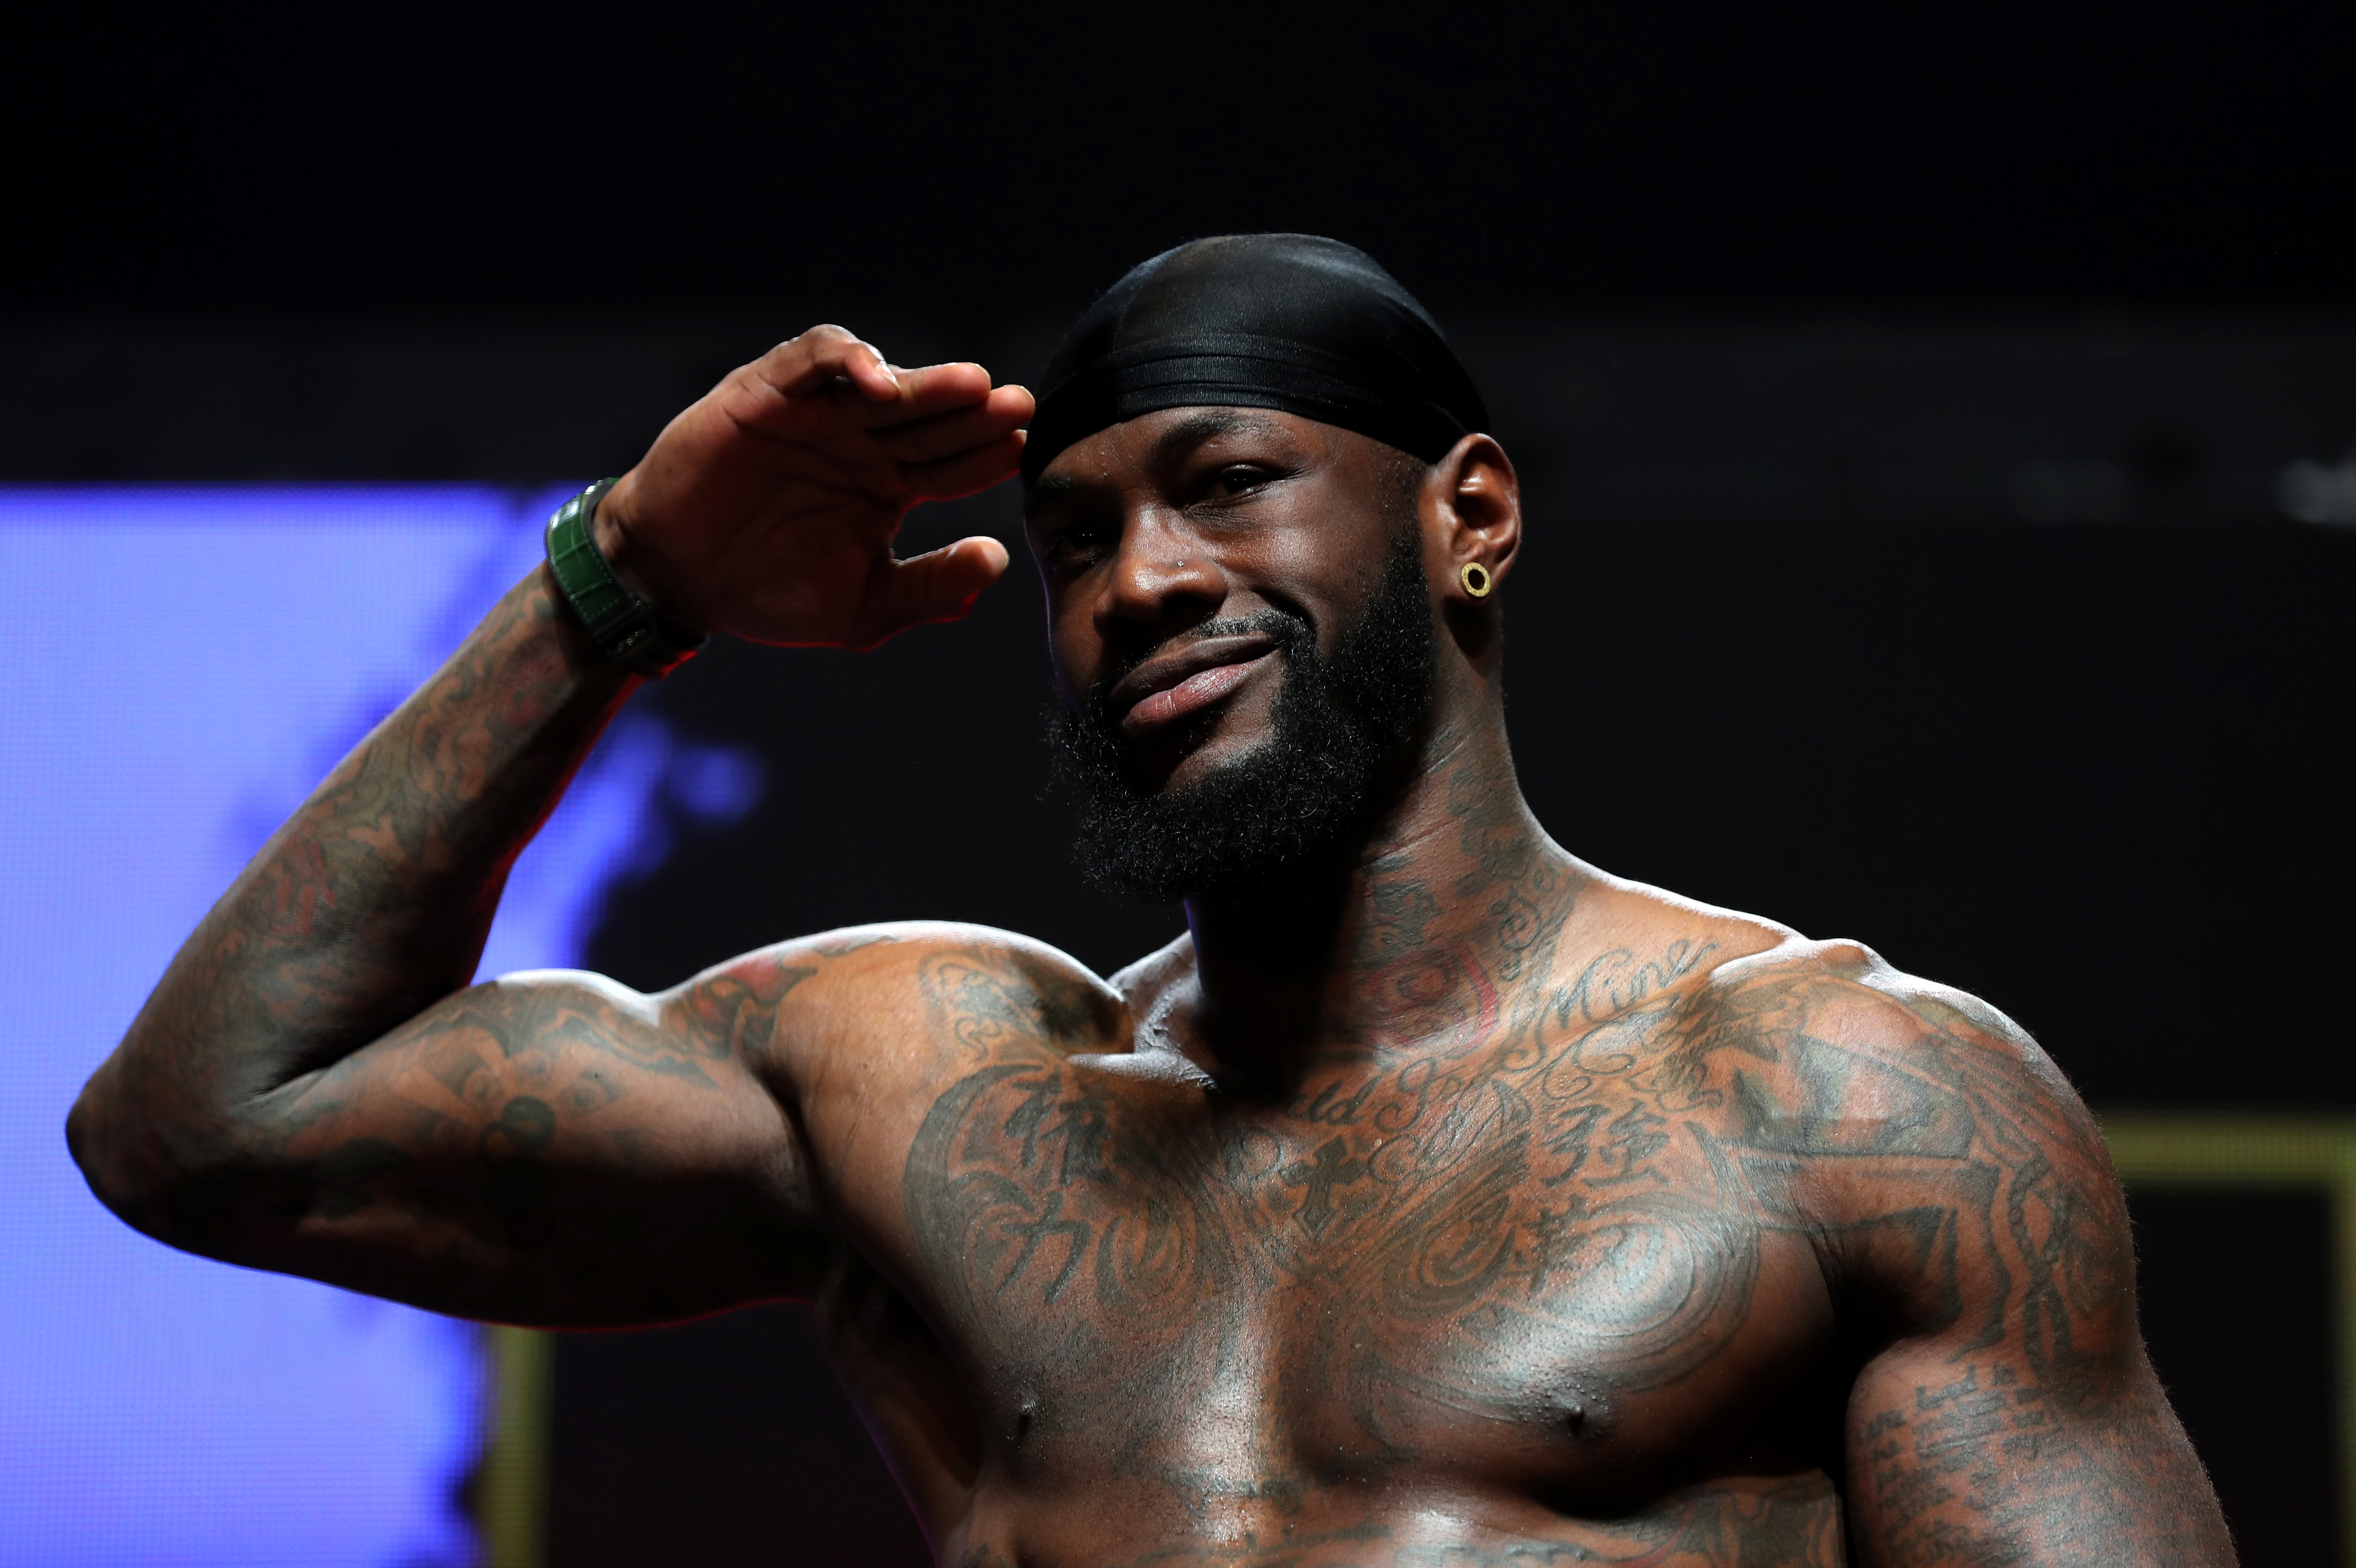 Deontay Wilder Live Streams Wild Buggy Driving ONLY Three Weeks Out From Tyson Fury Fight